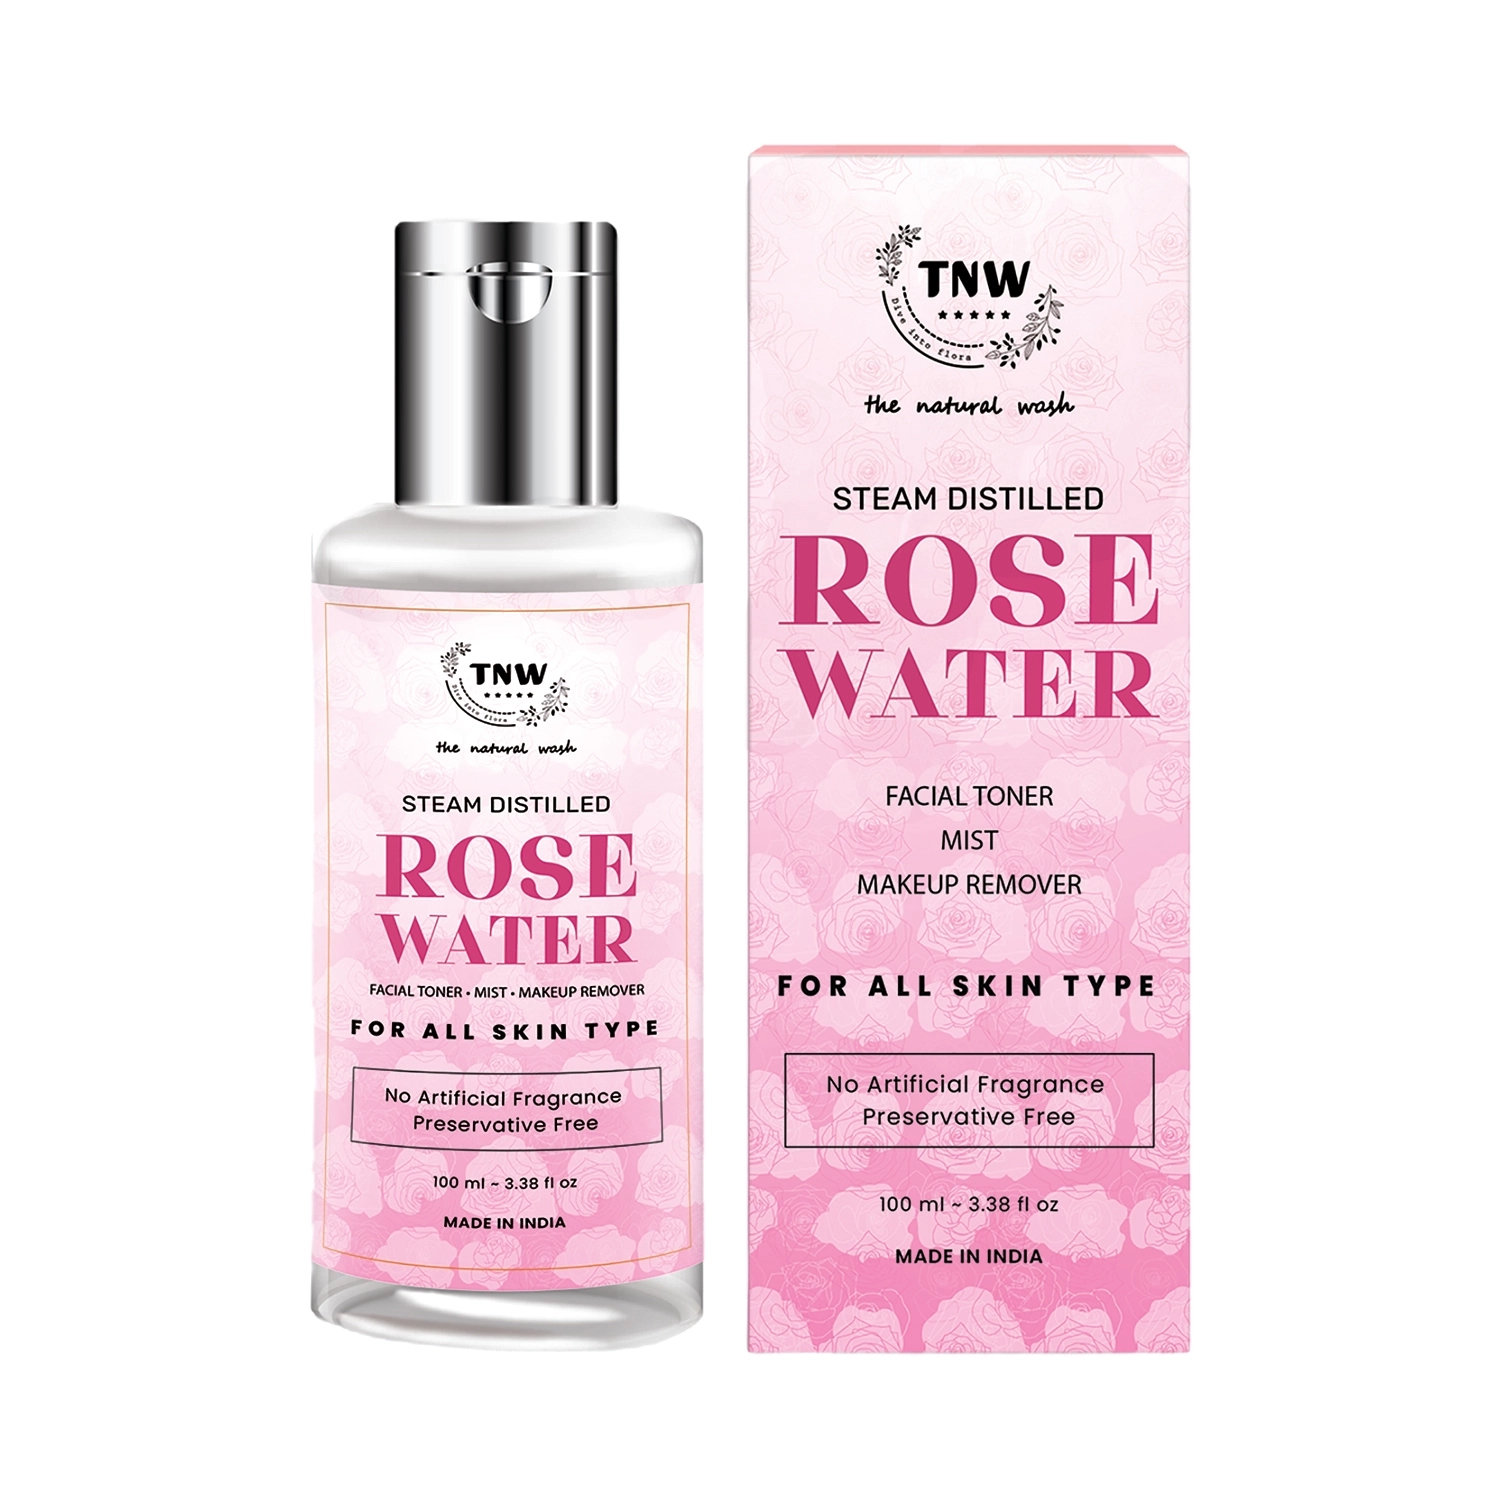 TNW The Natural Wash | TNW The Natural Wash Steam Distilled Pure Rose Water (100ml)